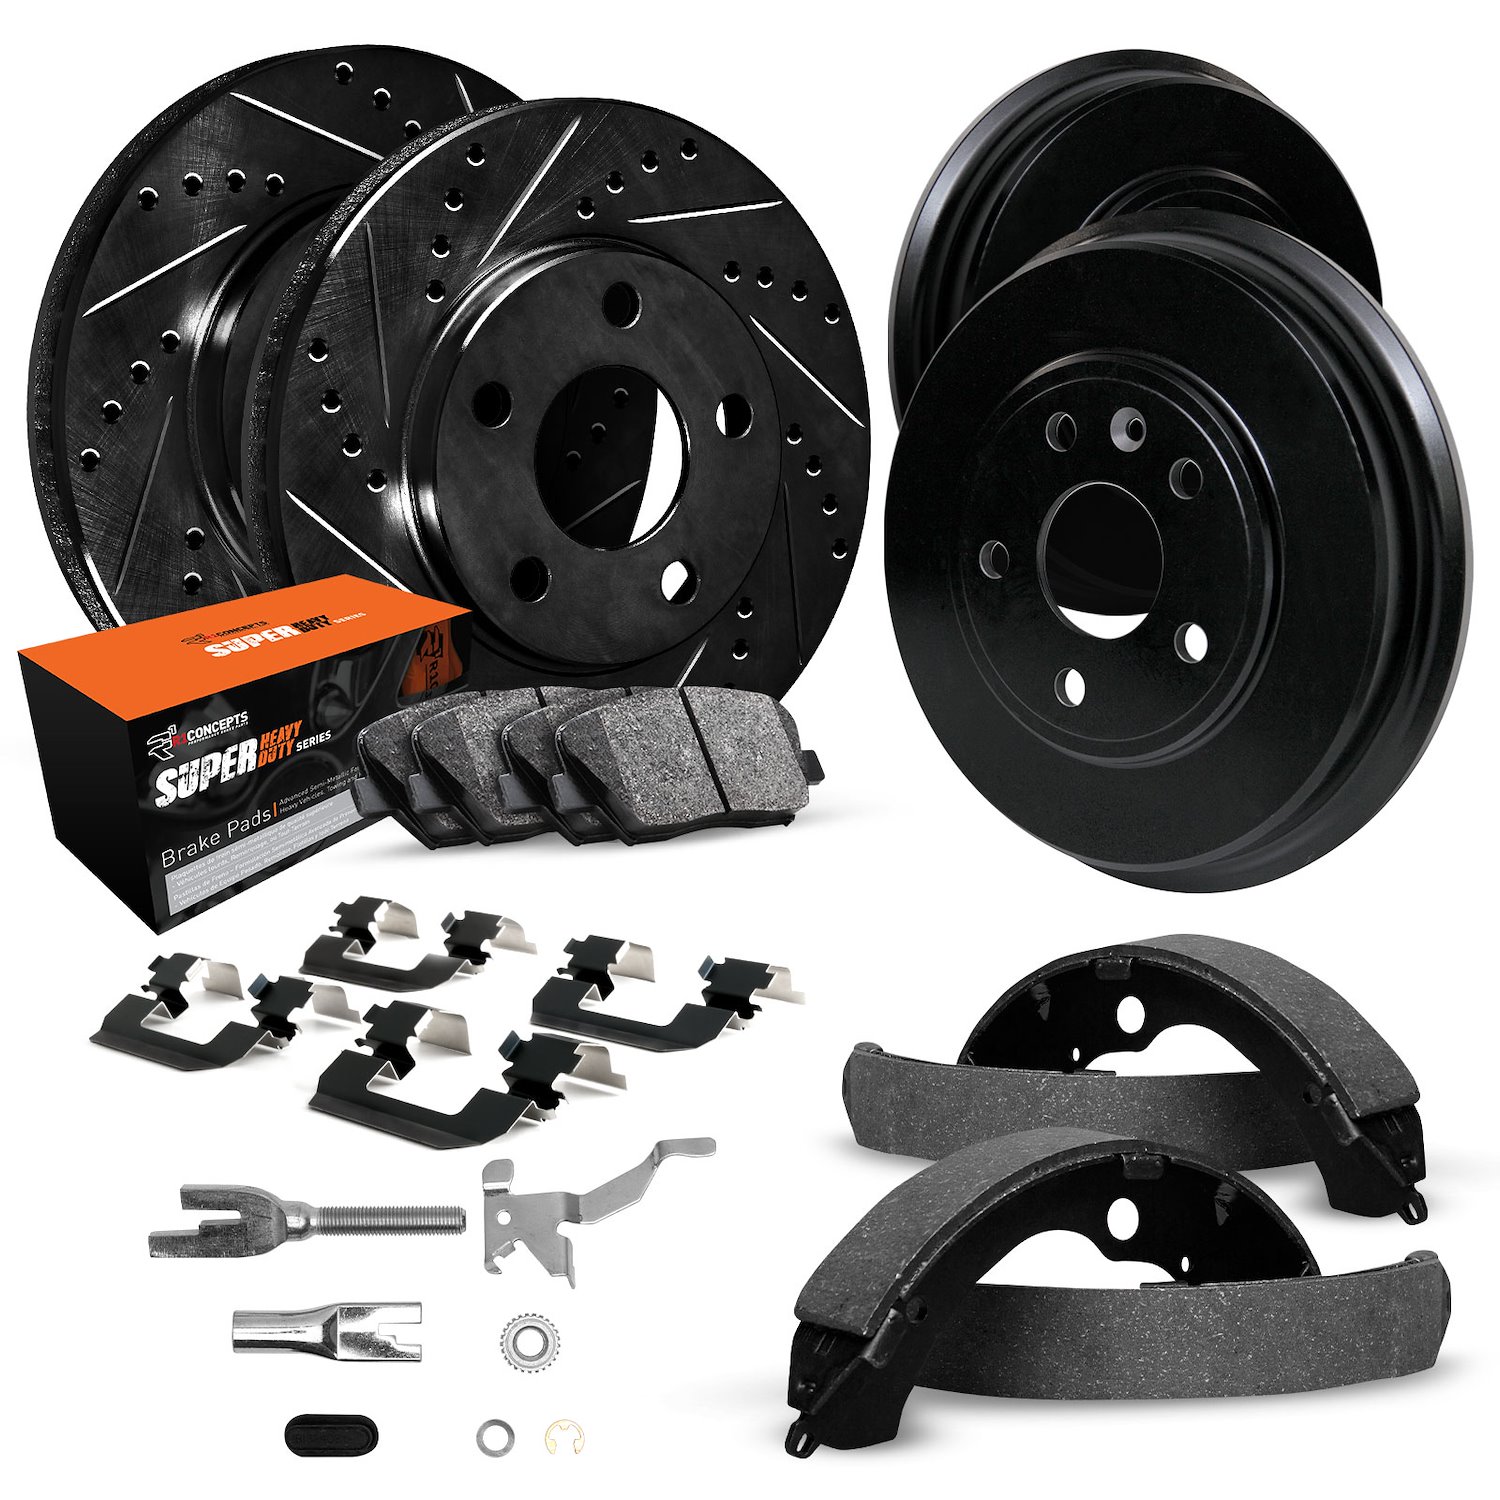 E-Line Slotted Black Brake Rotor & Drum Set w/Super-Duty Pads, Shoes, Hardware/Adjusters, 1998-2002 Ford/Lincoln/Mercury/Mazda